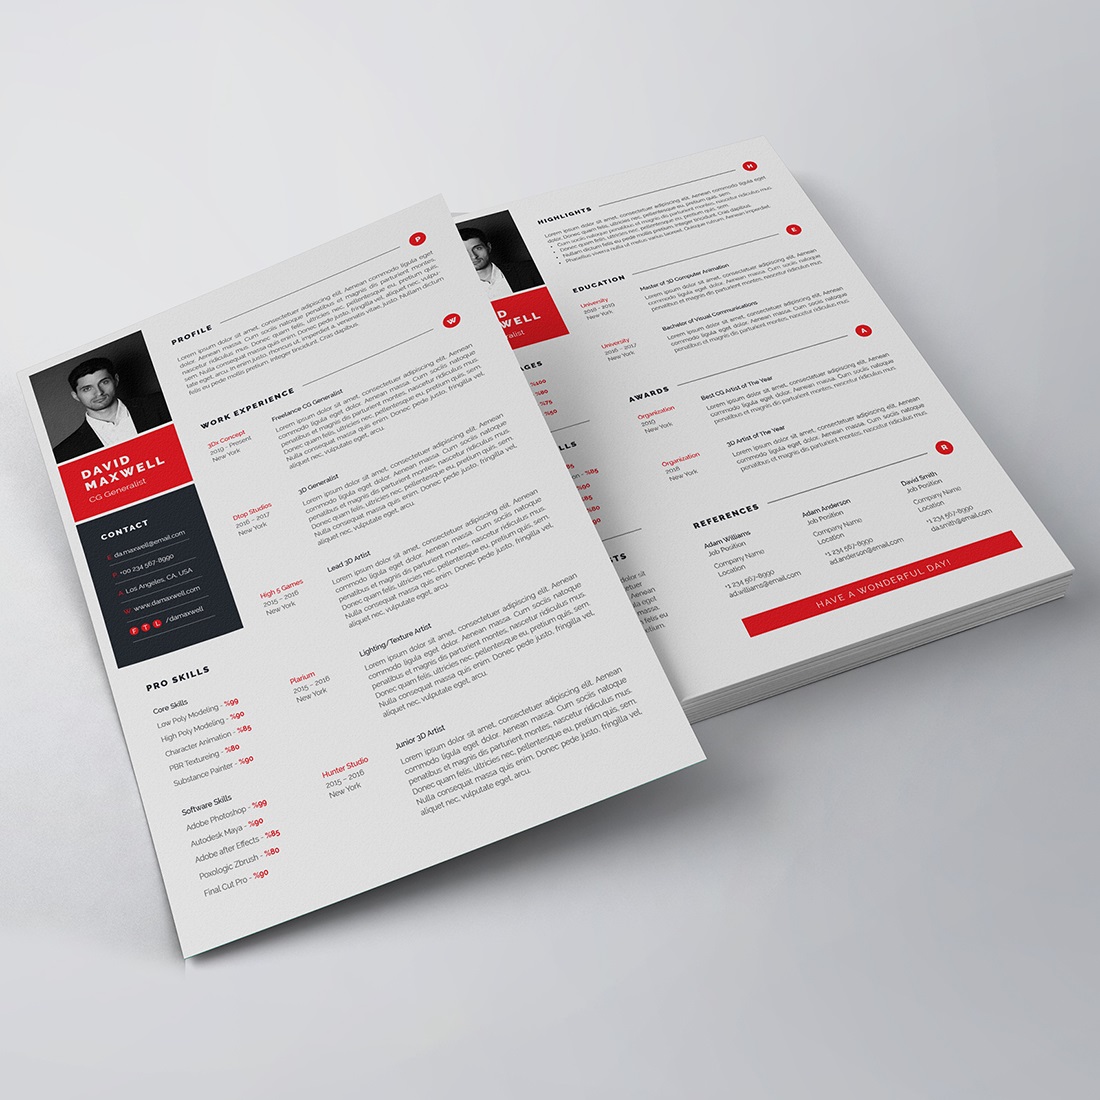 Clean and modern resume template with red accents.